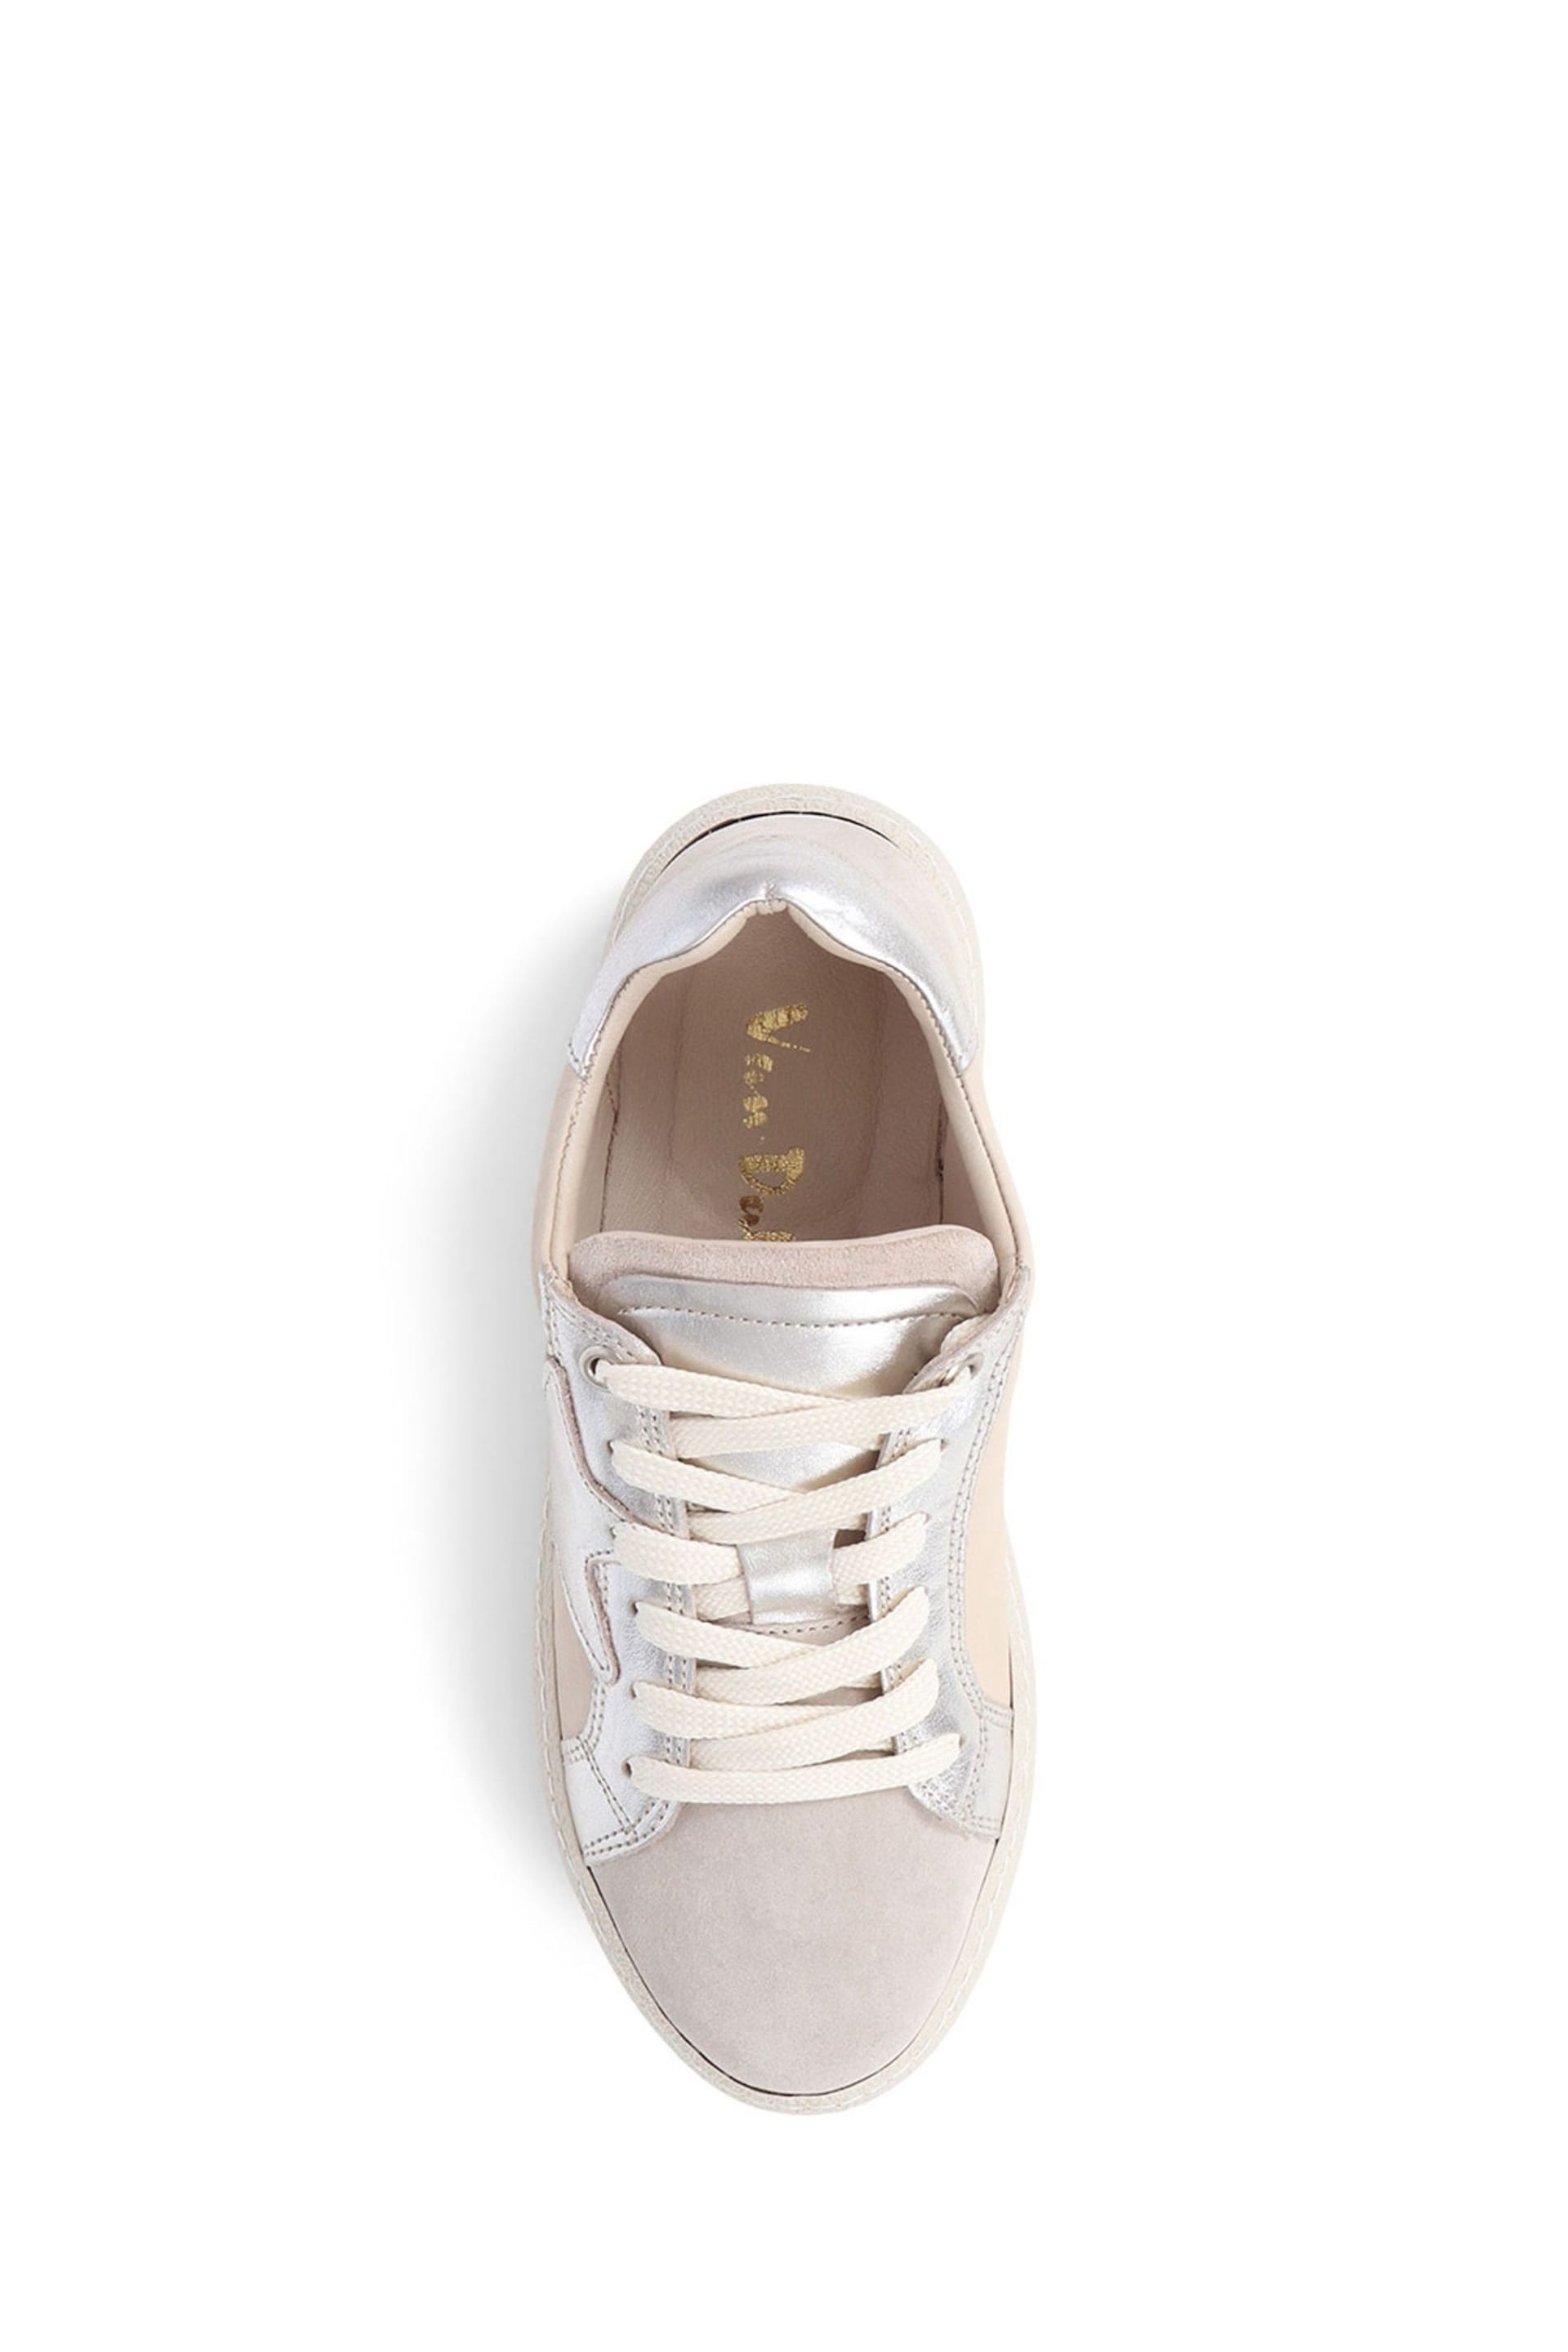 Pavers Van Dal Natural Leather Lace-Up Trainers - Image 4 of 5